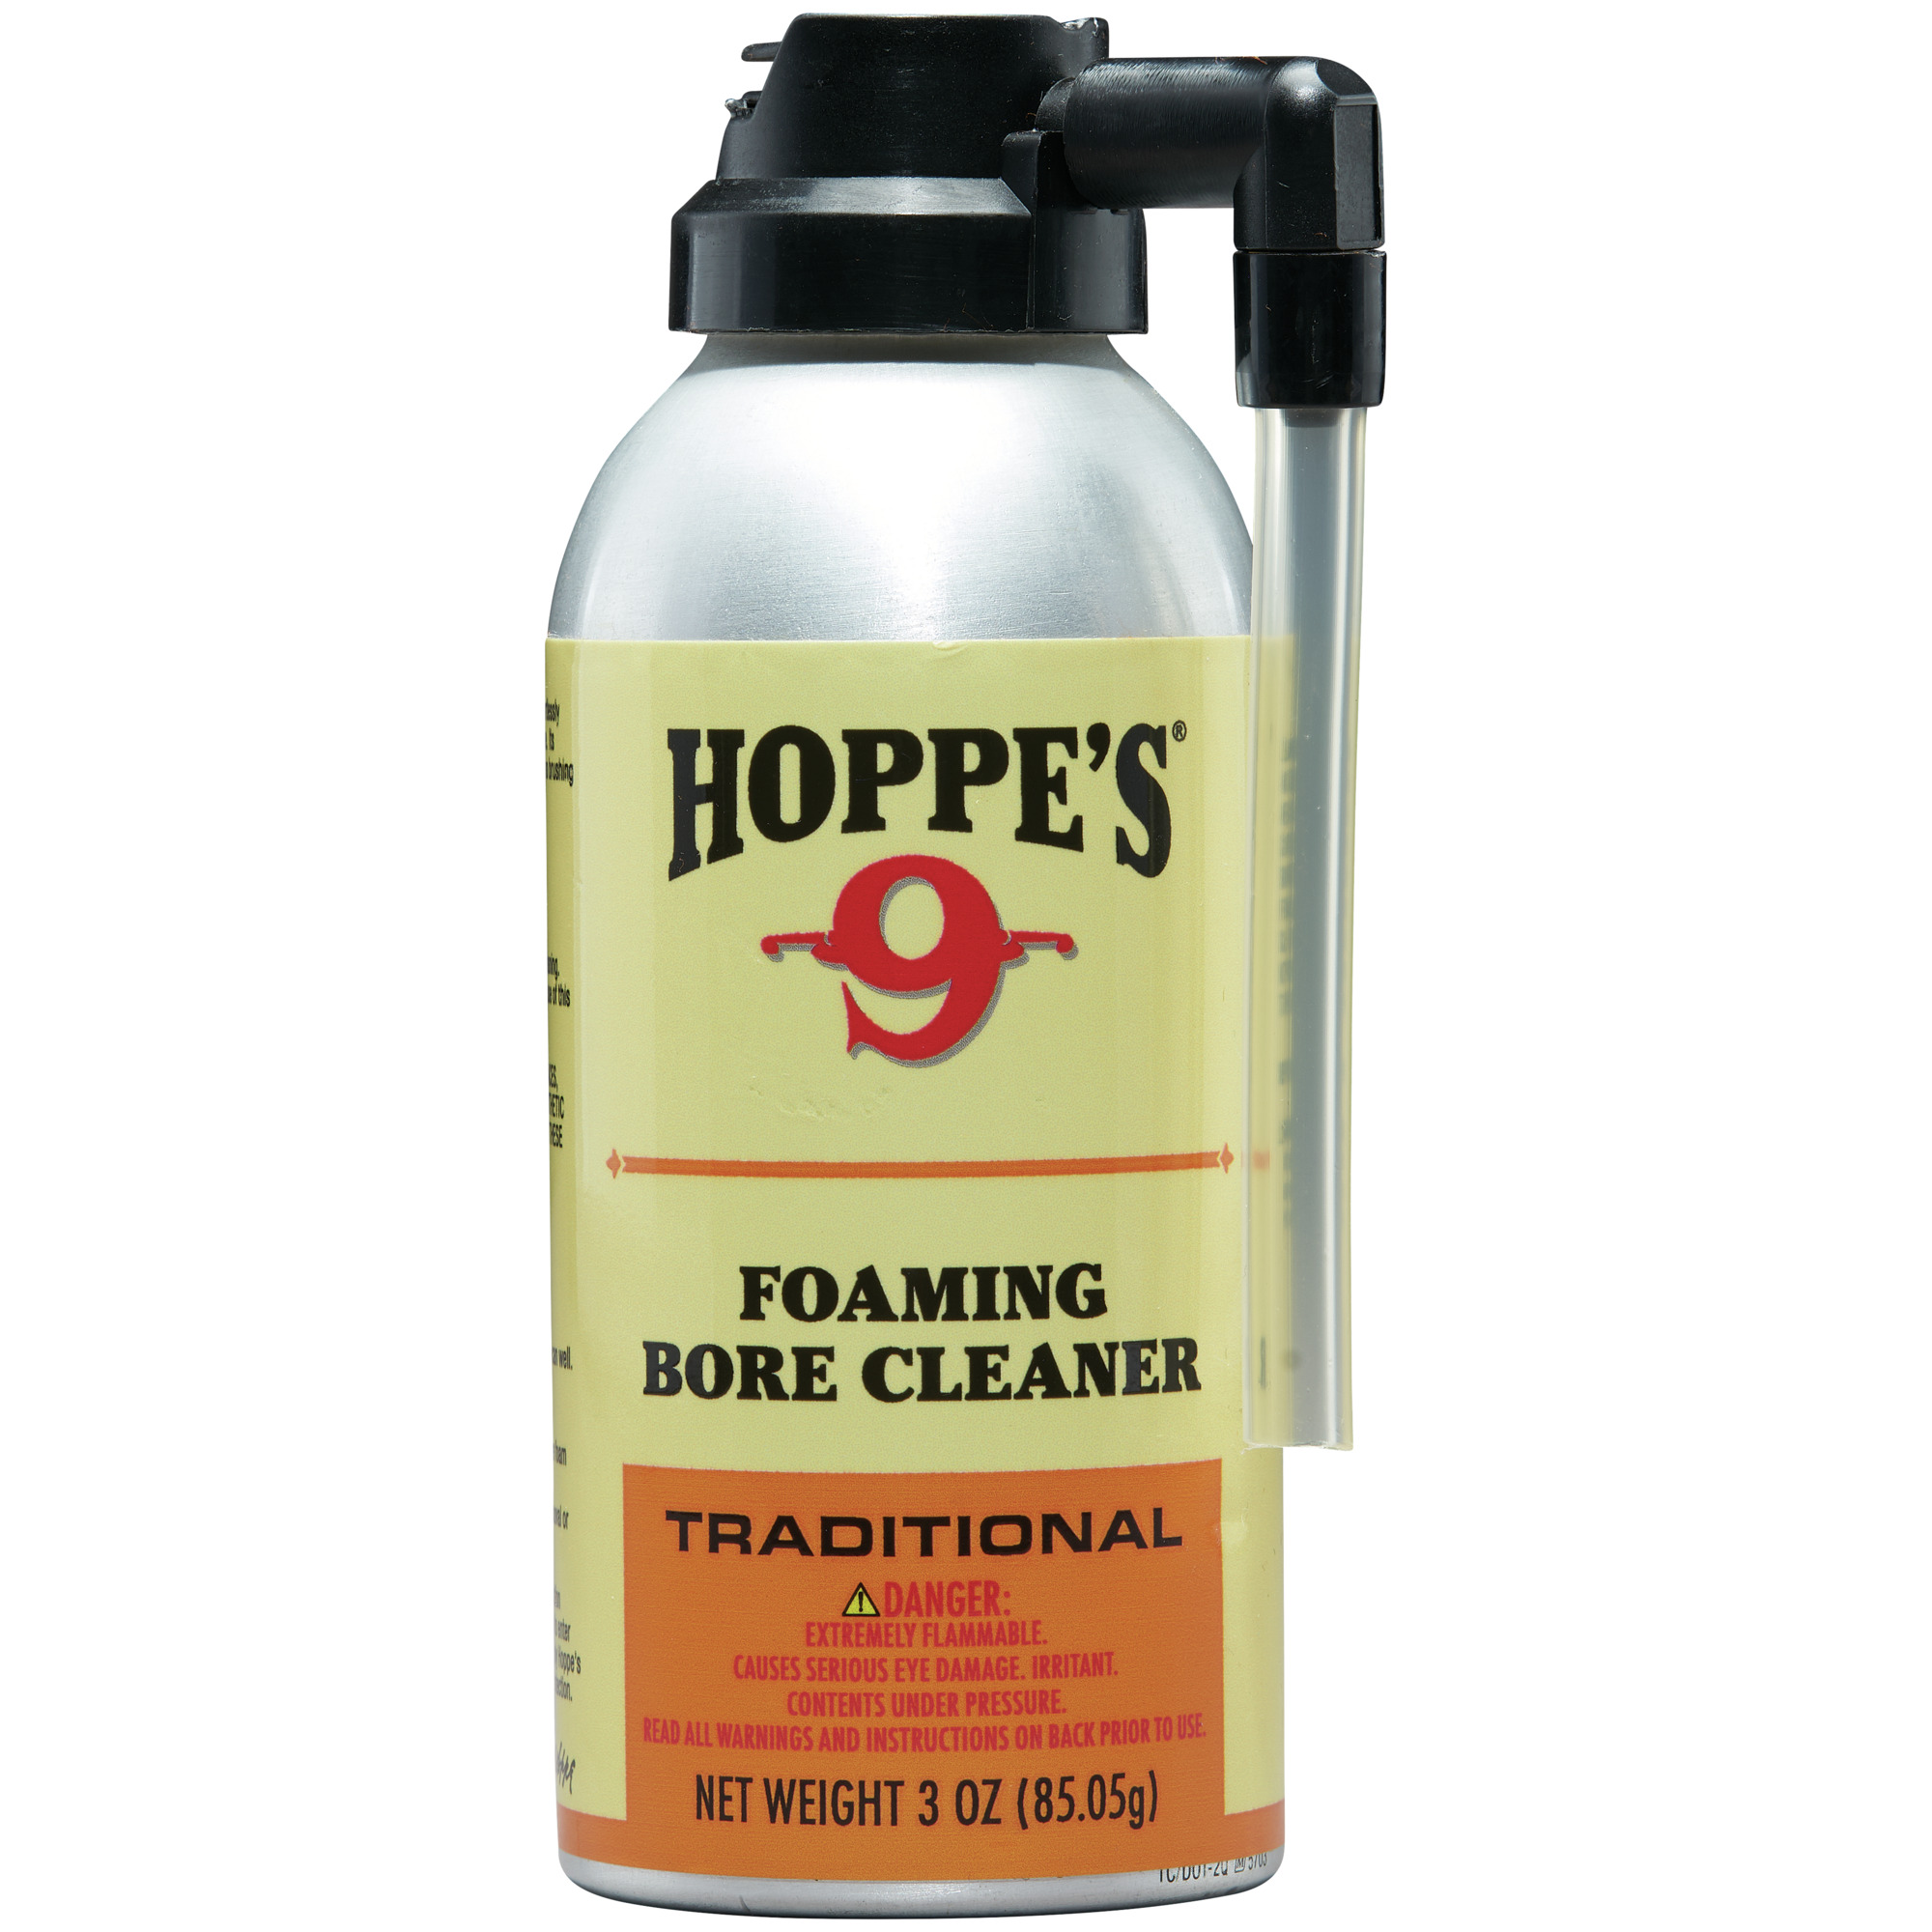 Foaming Bore Cleaner